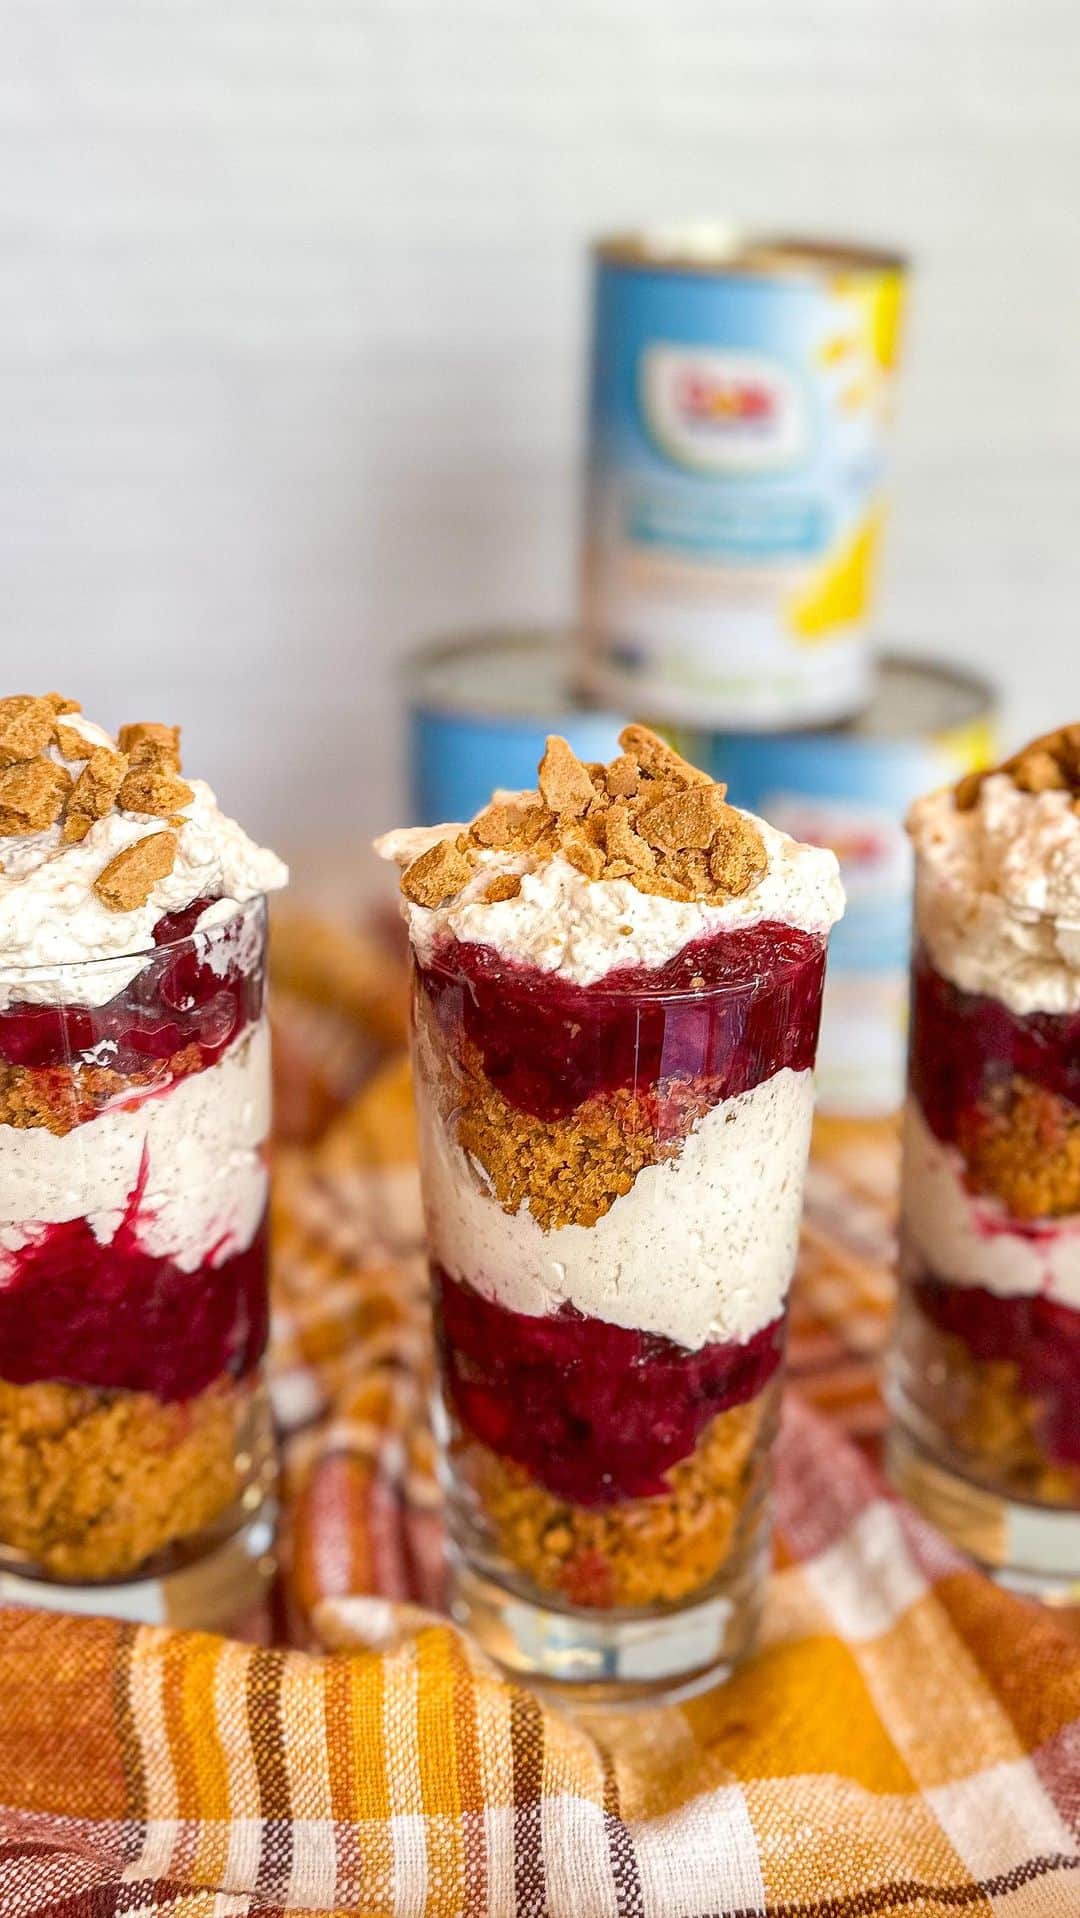 Dole Packaged Foods（ドール）のインスタグラム：「#sponsored Pumpkin Trifle with Pineapple Cranberry Compote. The perfect holiday dessert made with @dolesunshine Crushed Pineapple!🍍  Ingredients:  For the cake: 1 box spice cake mix (15.25 oz) 15 oz canned pumpkin puree 3 large eggs  For the compote: 20 oz can Dole Crushed Pineapple 12 oz fresh cranberries ⅓ cup granulated sugar  For the cream: 1 ½ cups heavy whipping cream 8 oz cream cheese, softened 1 cup granulated sugar 1 teaspoon vanilla extract 1 teaspoon pumpkin pie spice ⅛ teaspoon salt ¾ cup crushed gingersnap cookies  Directions: Preheat oven to 350 degrees F. Grease a 9x13 baking dish by spraying with baking spray.  In a large bowl, using a hand mixer or whisk, mix together cake mix, pumpkin puree, and eggs. Stir until well combined then pour into prepared dish. Bake 25-30 minutes or until a toothpick inserted comes out clean. Let cool completely then cut cake until small squares (while in dish) then set aside.  In a small bowl, beat heavy whipping cream until stiff peaks form. Set aside. In a larger bowl or stand mixer, beat cream cheese, sugar, vanilla, pumpkin pie spice and salt until smooth. Fold whipped cream into the cream cheese mixture until well combined. Set in fridge until ready to use.  In a medium saucepan over medium high heat, add cranberries, pineapple, and sugar. Stir and cook until mixture comes to a low boil. Continue cooking until slightly thickened, about 10 minutes. Set aside to cool completely. Place in fridge until ready to assemble trifle.  In a trifle bowl or large glass bowl, layer 1/3 of the cake cubes and crumbles, 1/3 pineapple cranberry compote, and 1/3 cream filling. Repeat two more times ending in cream. Top with crushed cookies.  Refrigerate at least 3 hours before serving.  Note: Can also be made in individual clear glasses.  #DoleSunshine #CanItPineapple」